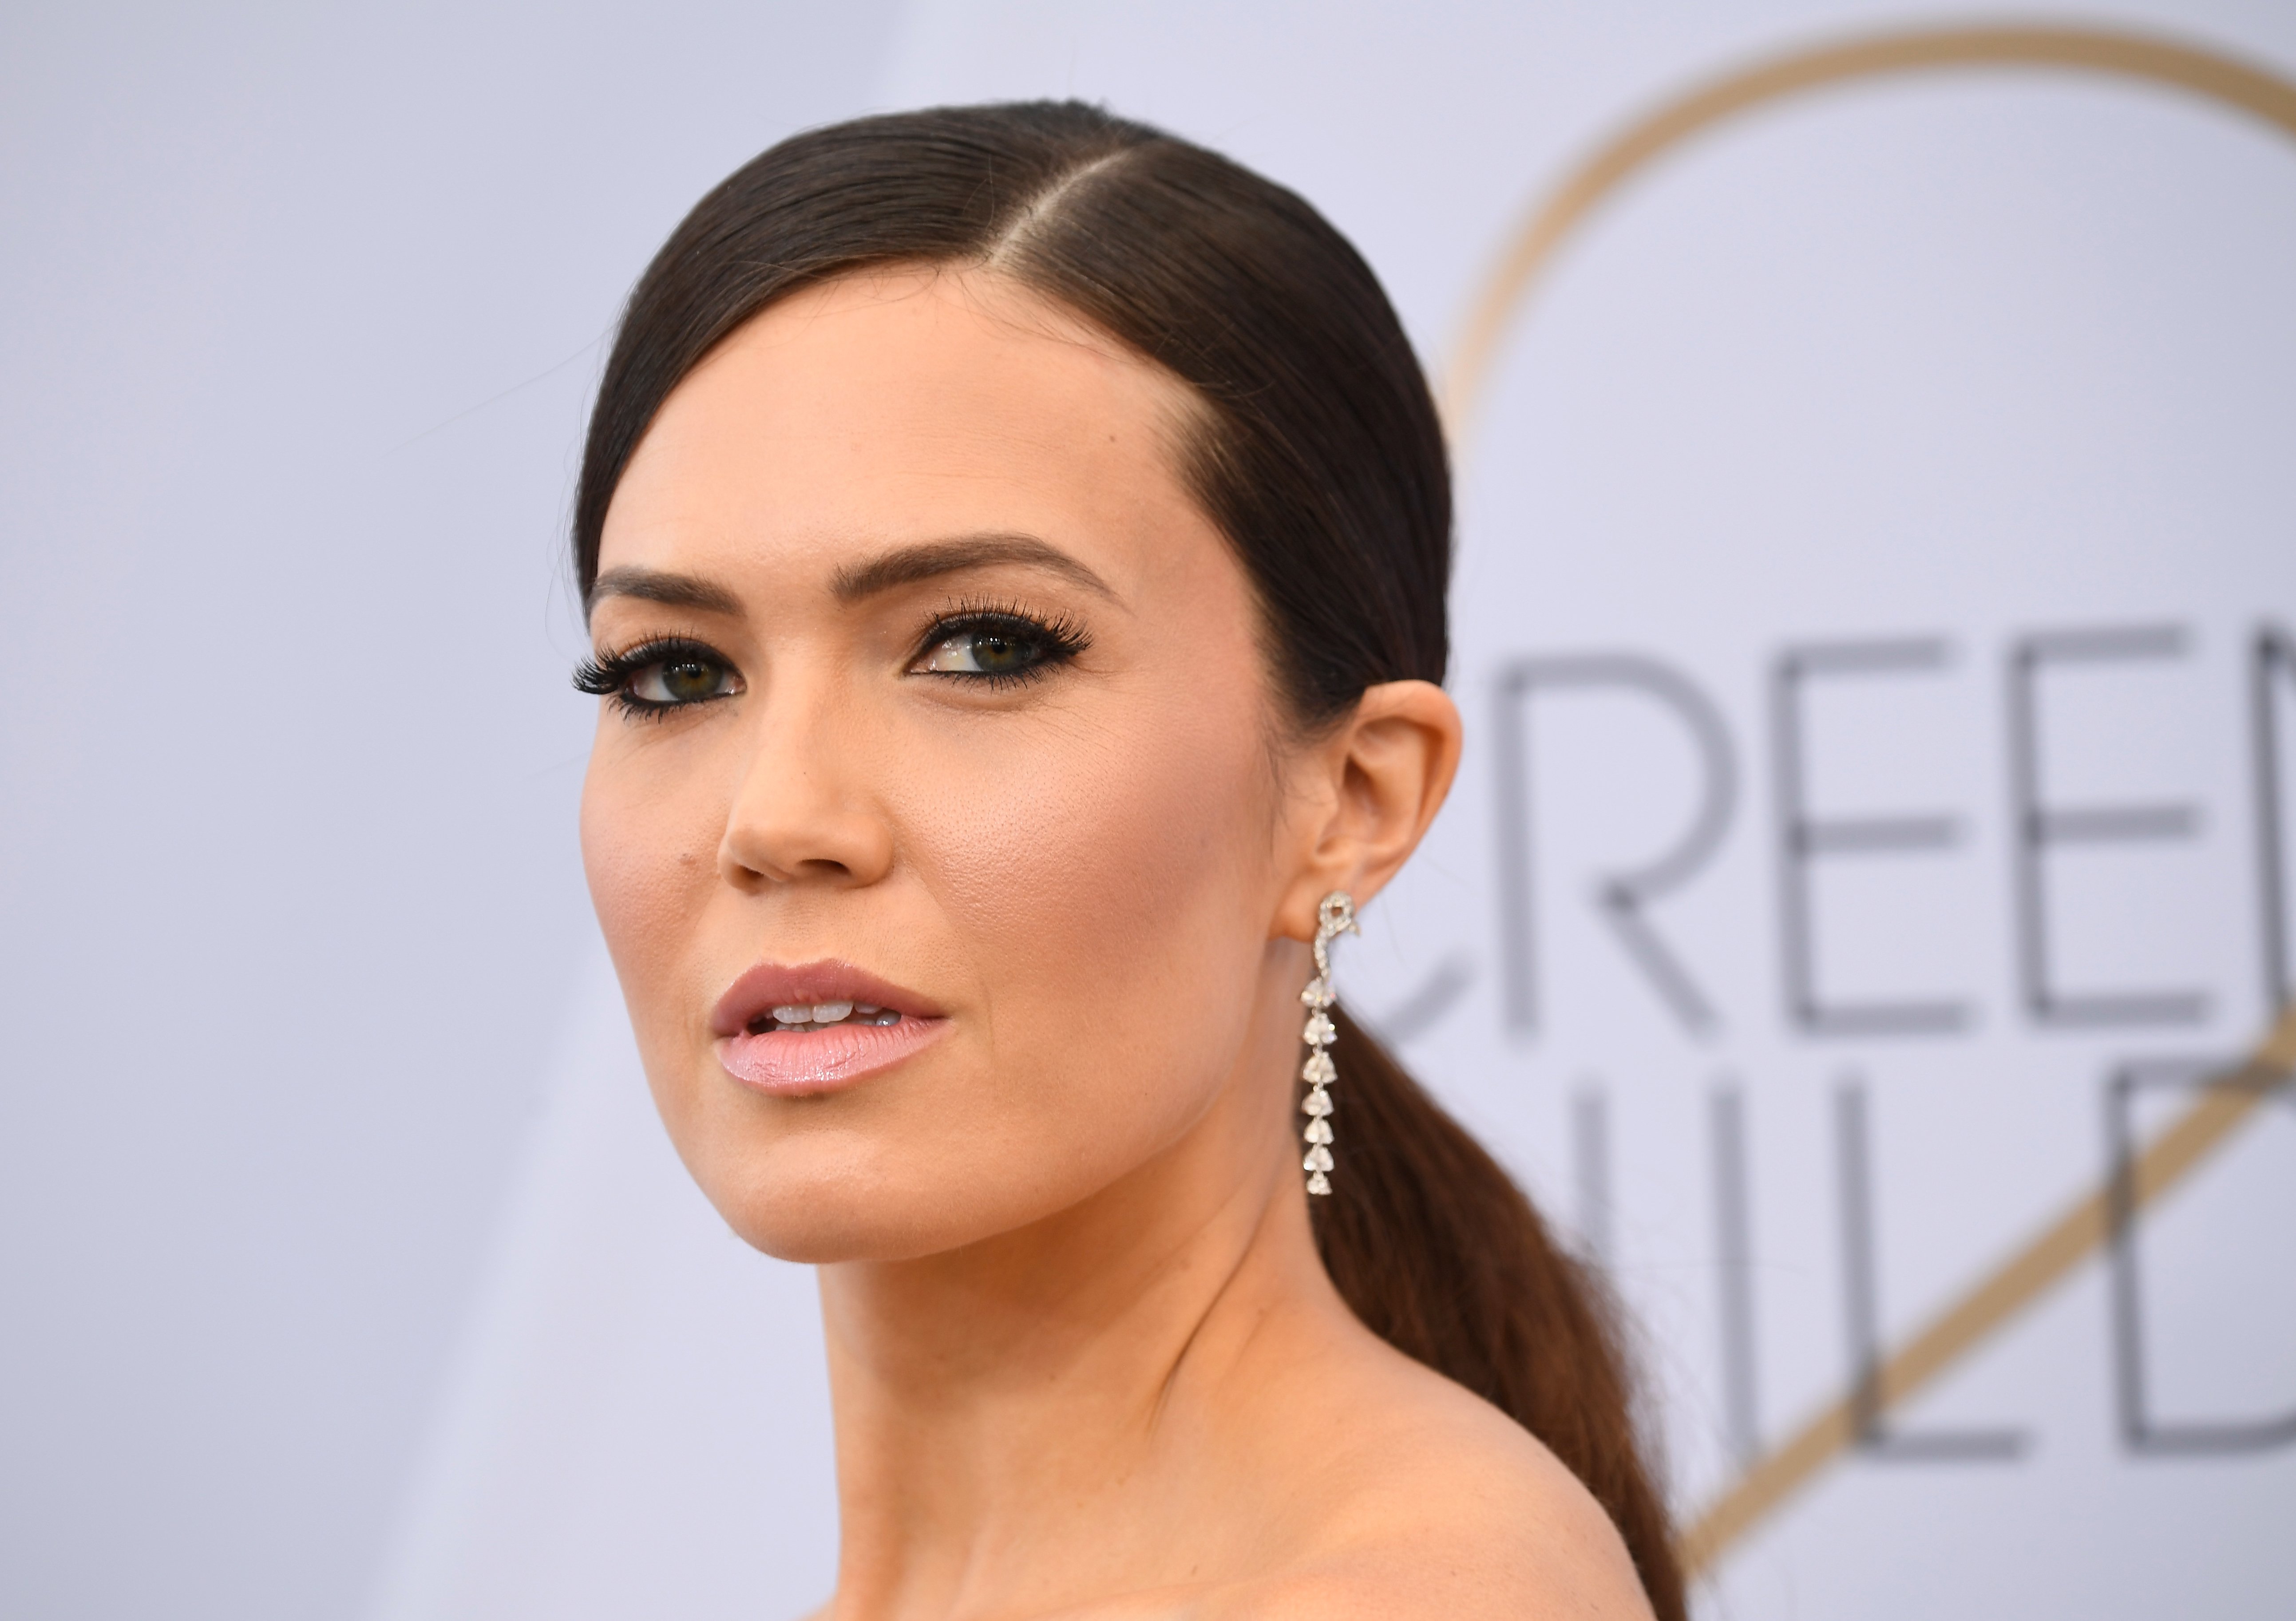 Mandy Moore attends the 25th Annual Screen Actors Guild Awards on January 27, 2019, in Los Angeles, California. | Source: Getty Images.